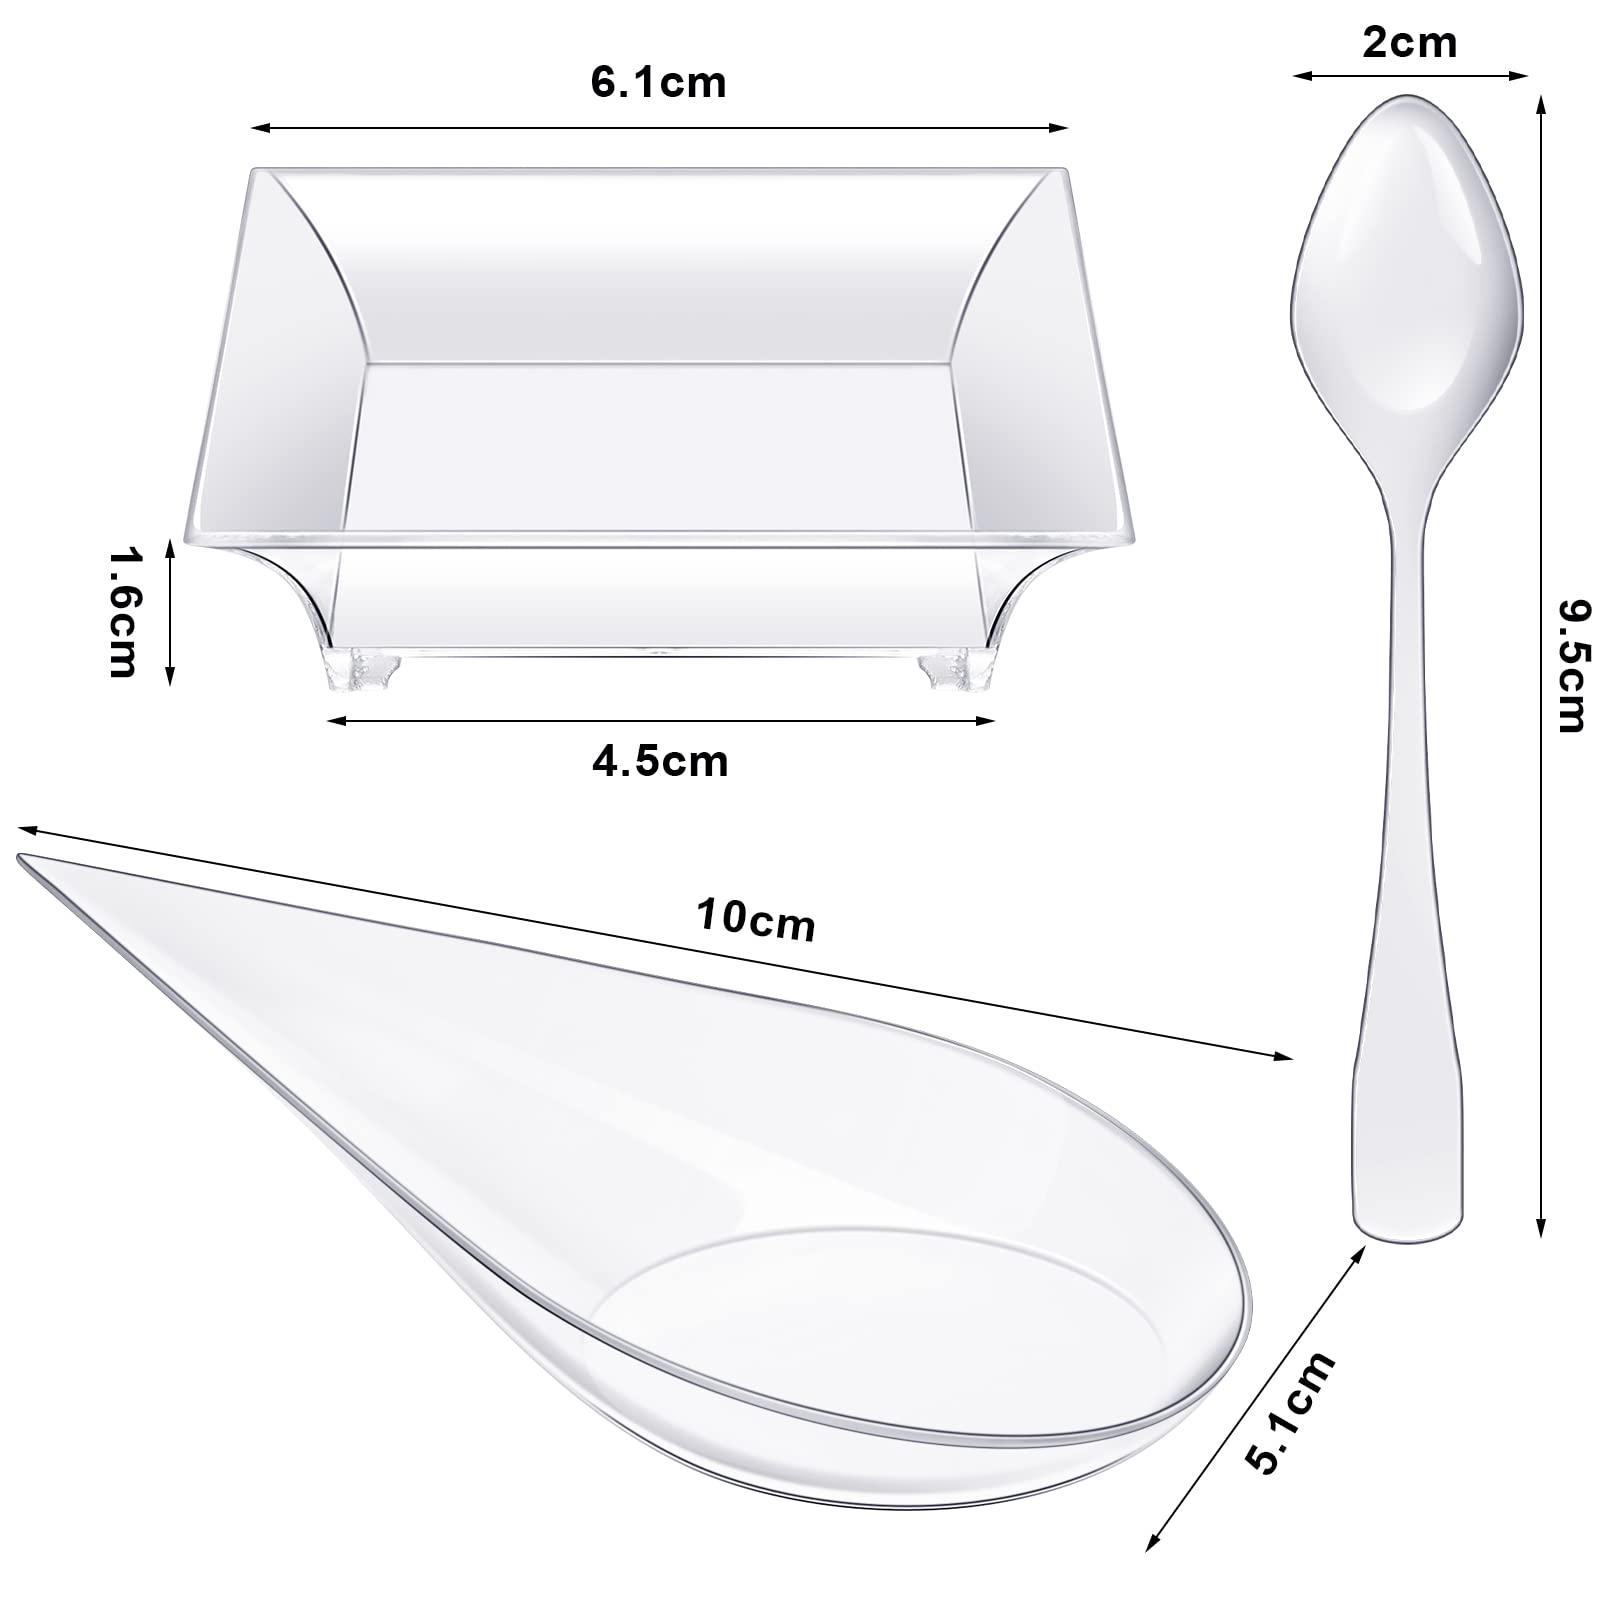 400 Pcs Mini Dessert Plates with Tasting Spoons Disposable Serving Trays 100 Pcs Small Square Appetizer Plates 100 Pcs Clear Plastic Plates 200 Pcs Mini Spoons for Desserts Party Fruit (Water Drop)